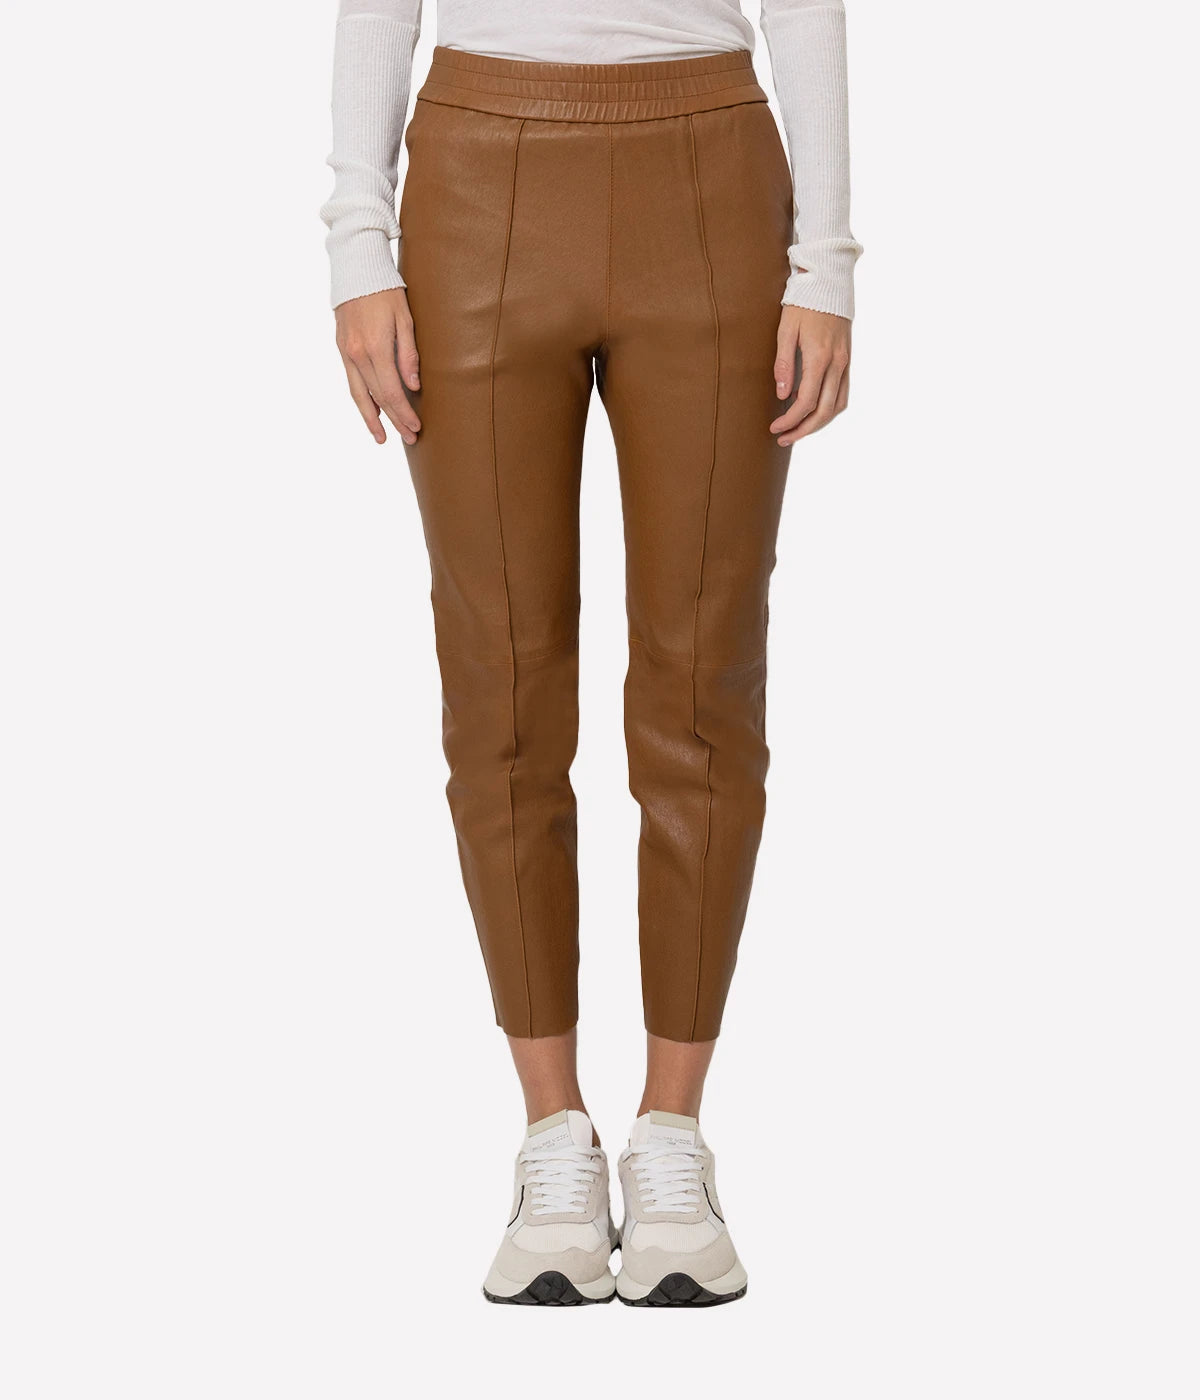 Slim Jogger Leather Pant with Pockets in Walnut